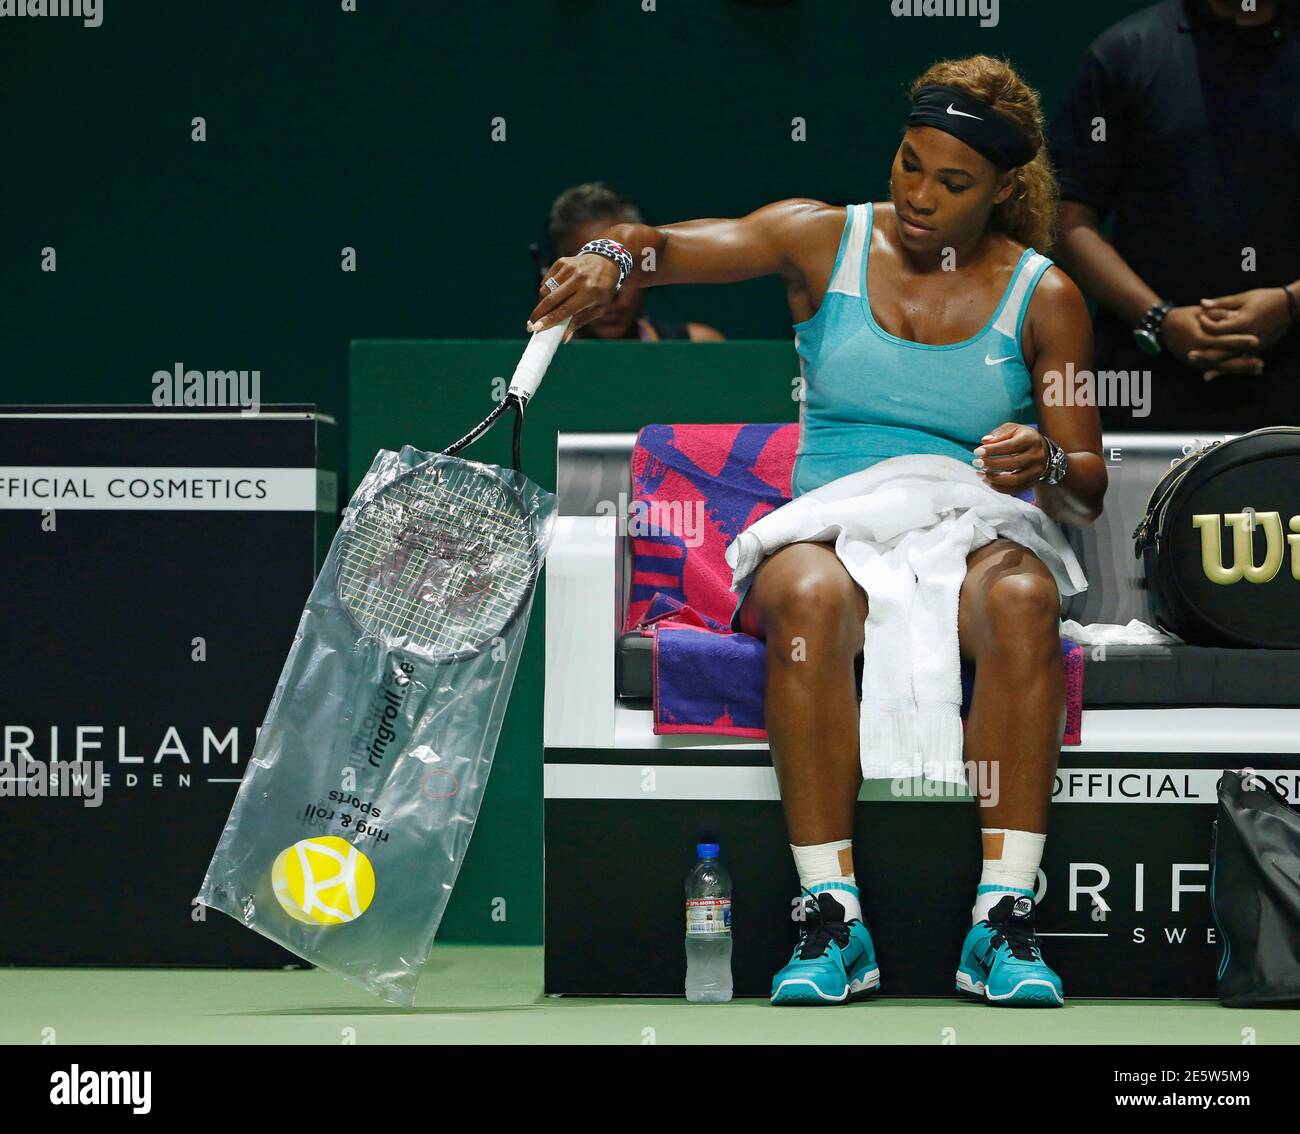 Serena Williams of the U.S. takes the plastic cover off her third racket after smashing her first two, during her WTA Finals singles semi-final tennis match against Caroline Wozniacki of Denmark at the Singapore Indoor Stadium October 25, 2014. REUTERS/Edgar Su (SINGAPORE - Tags: SPORT TENNIS) Stock Photo